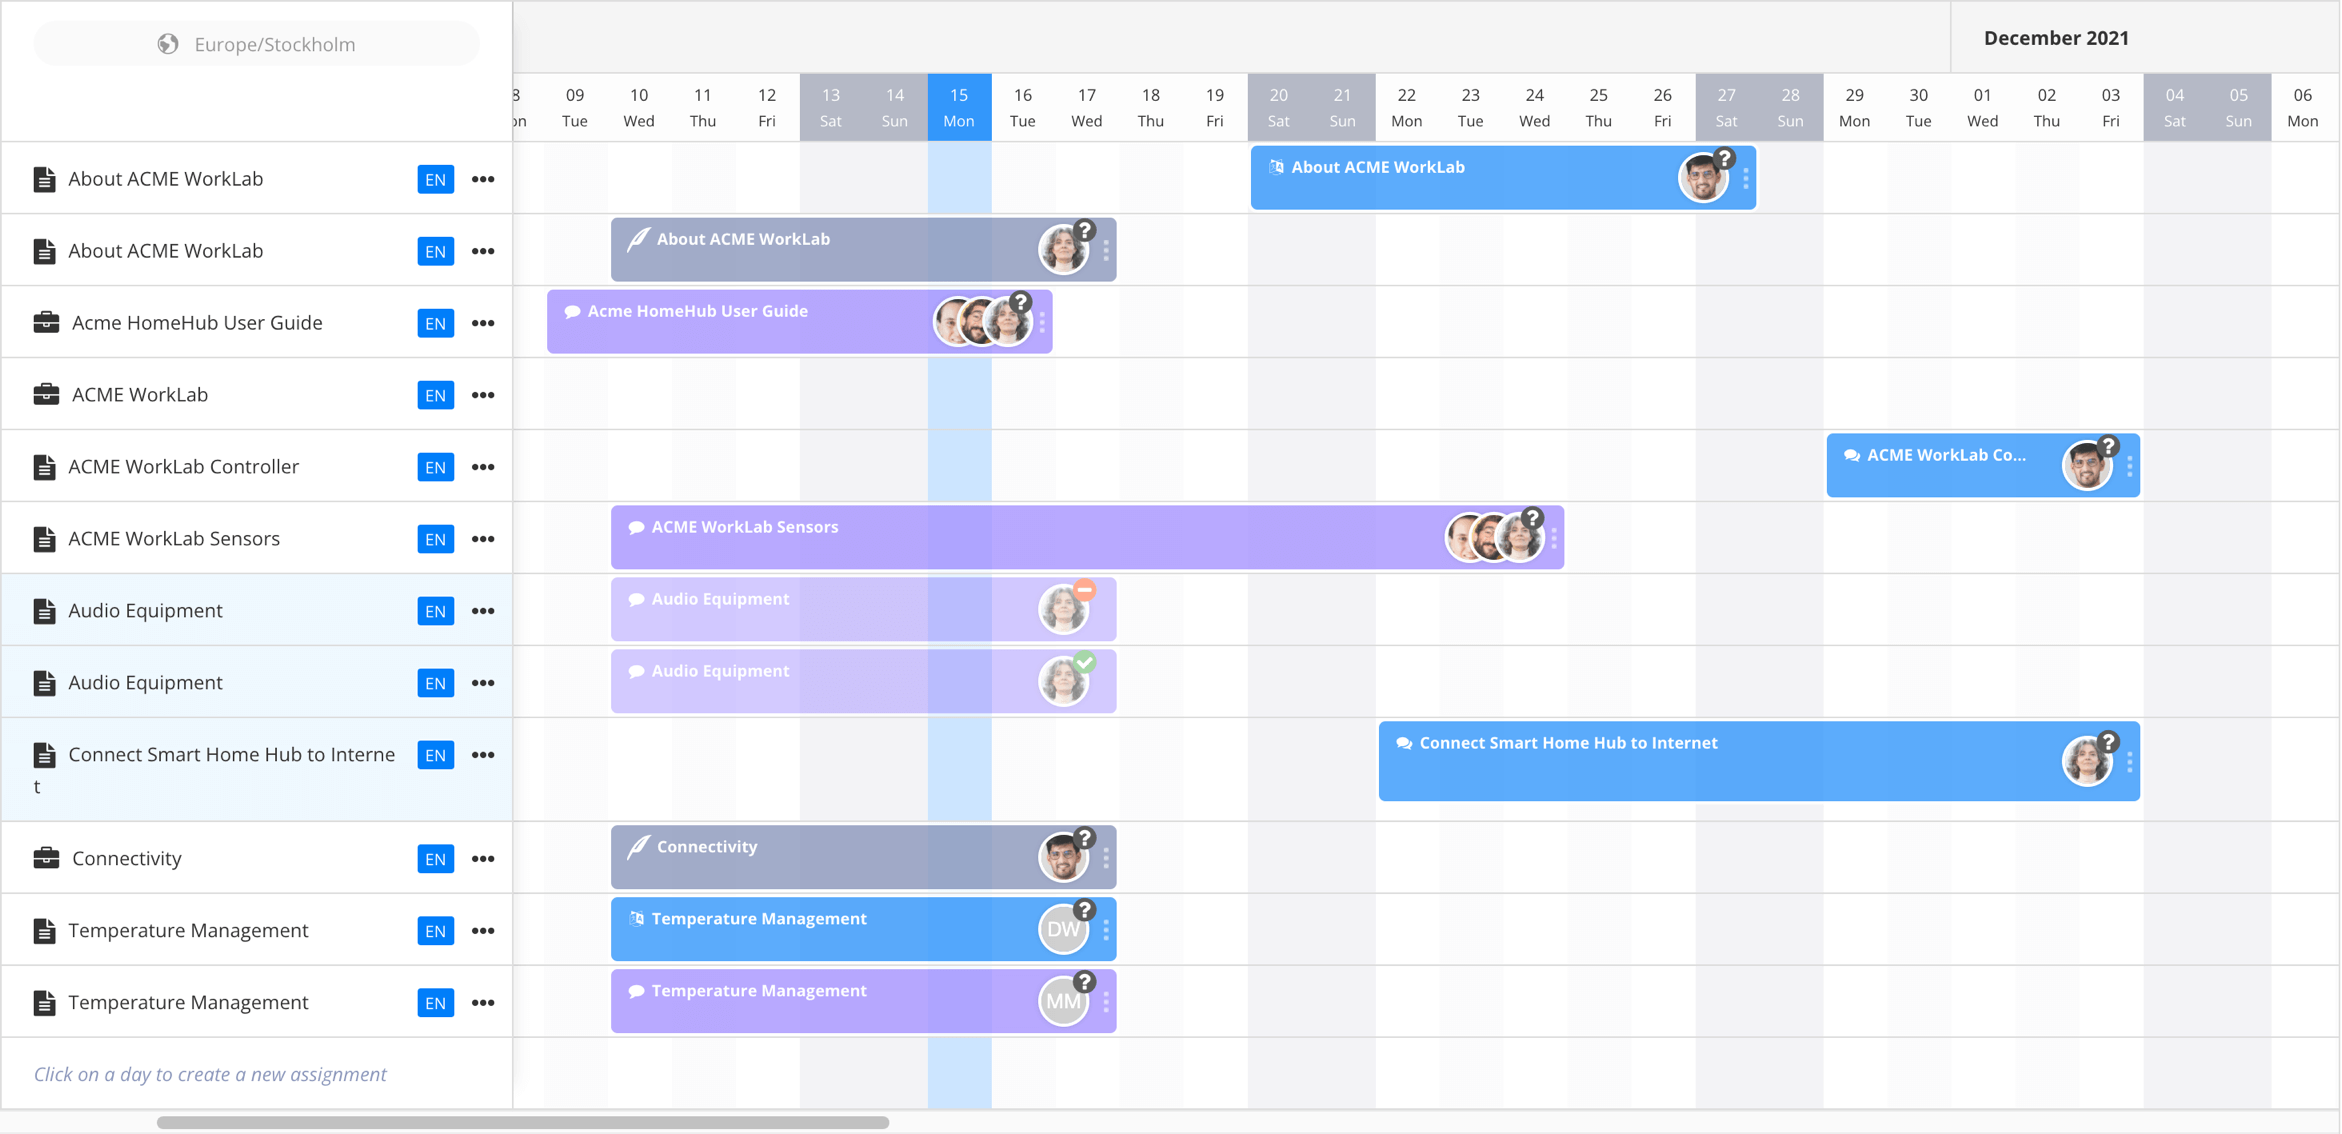 The Planner showing assignments scheduled for different dates. Some assignments have already been completed.